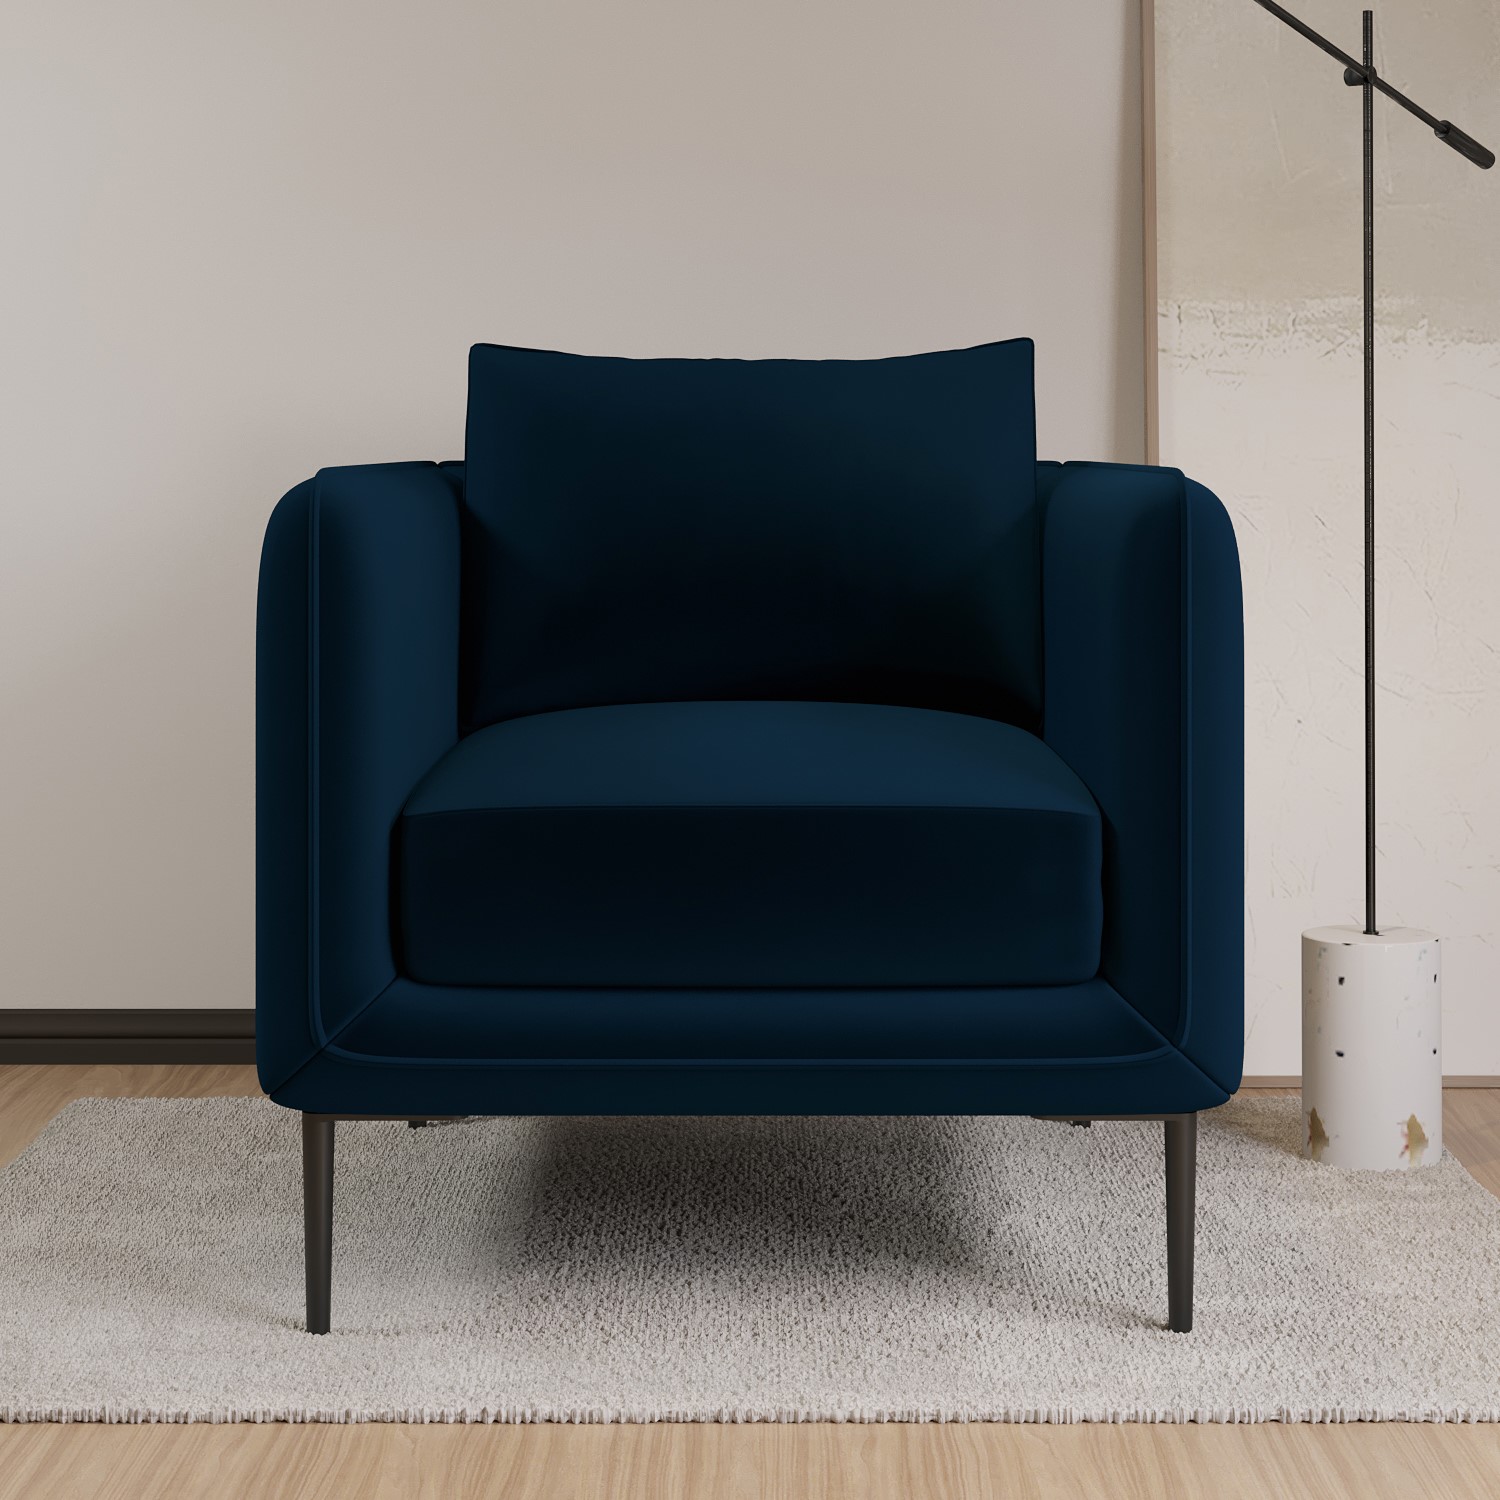 Read more about Navy velvet armchair lenny